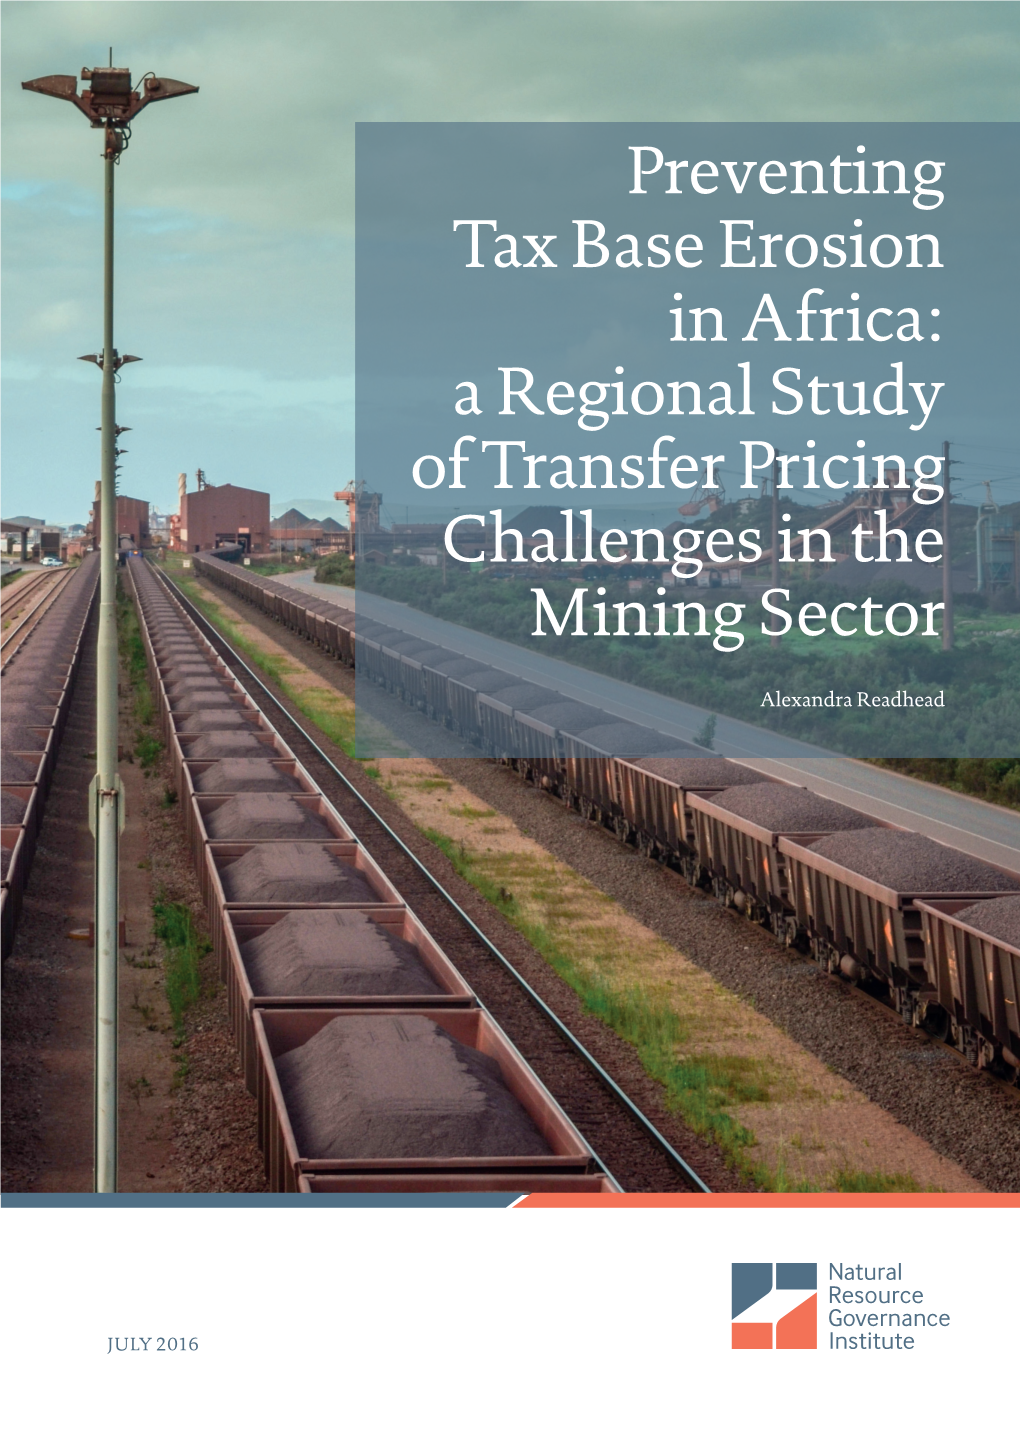 Preventing Tax Base Erosion in Africa: a Regional Study of Transfer Pricing Challenges in the Mining Sector